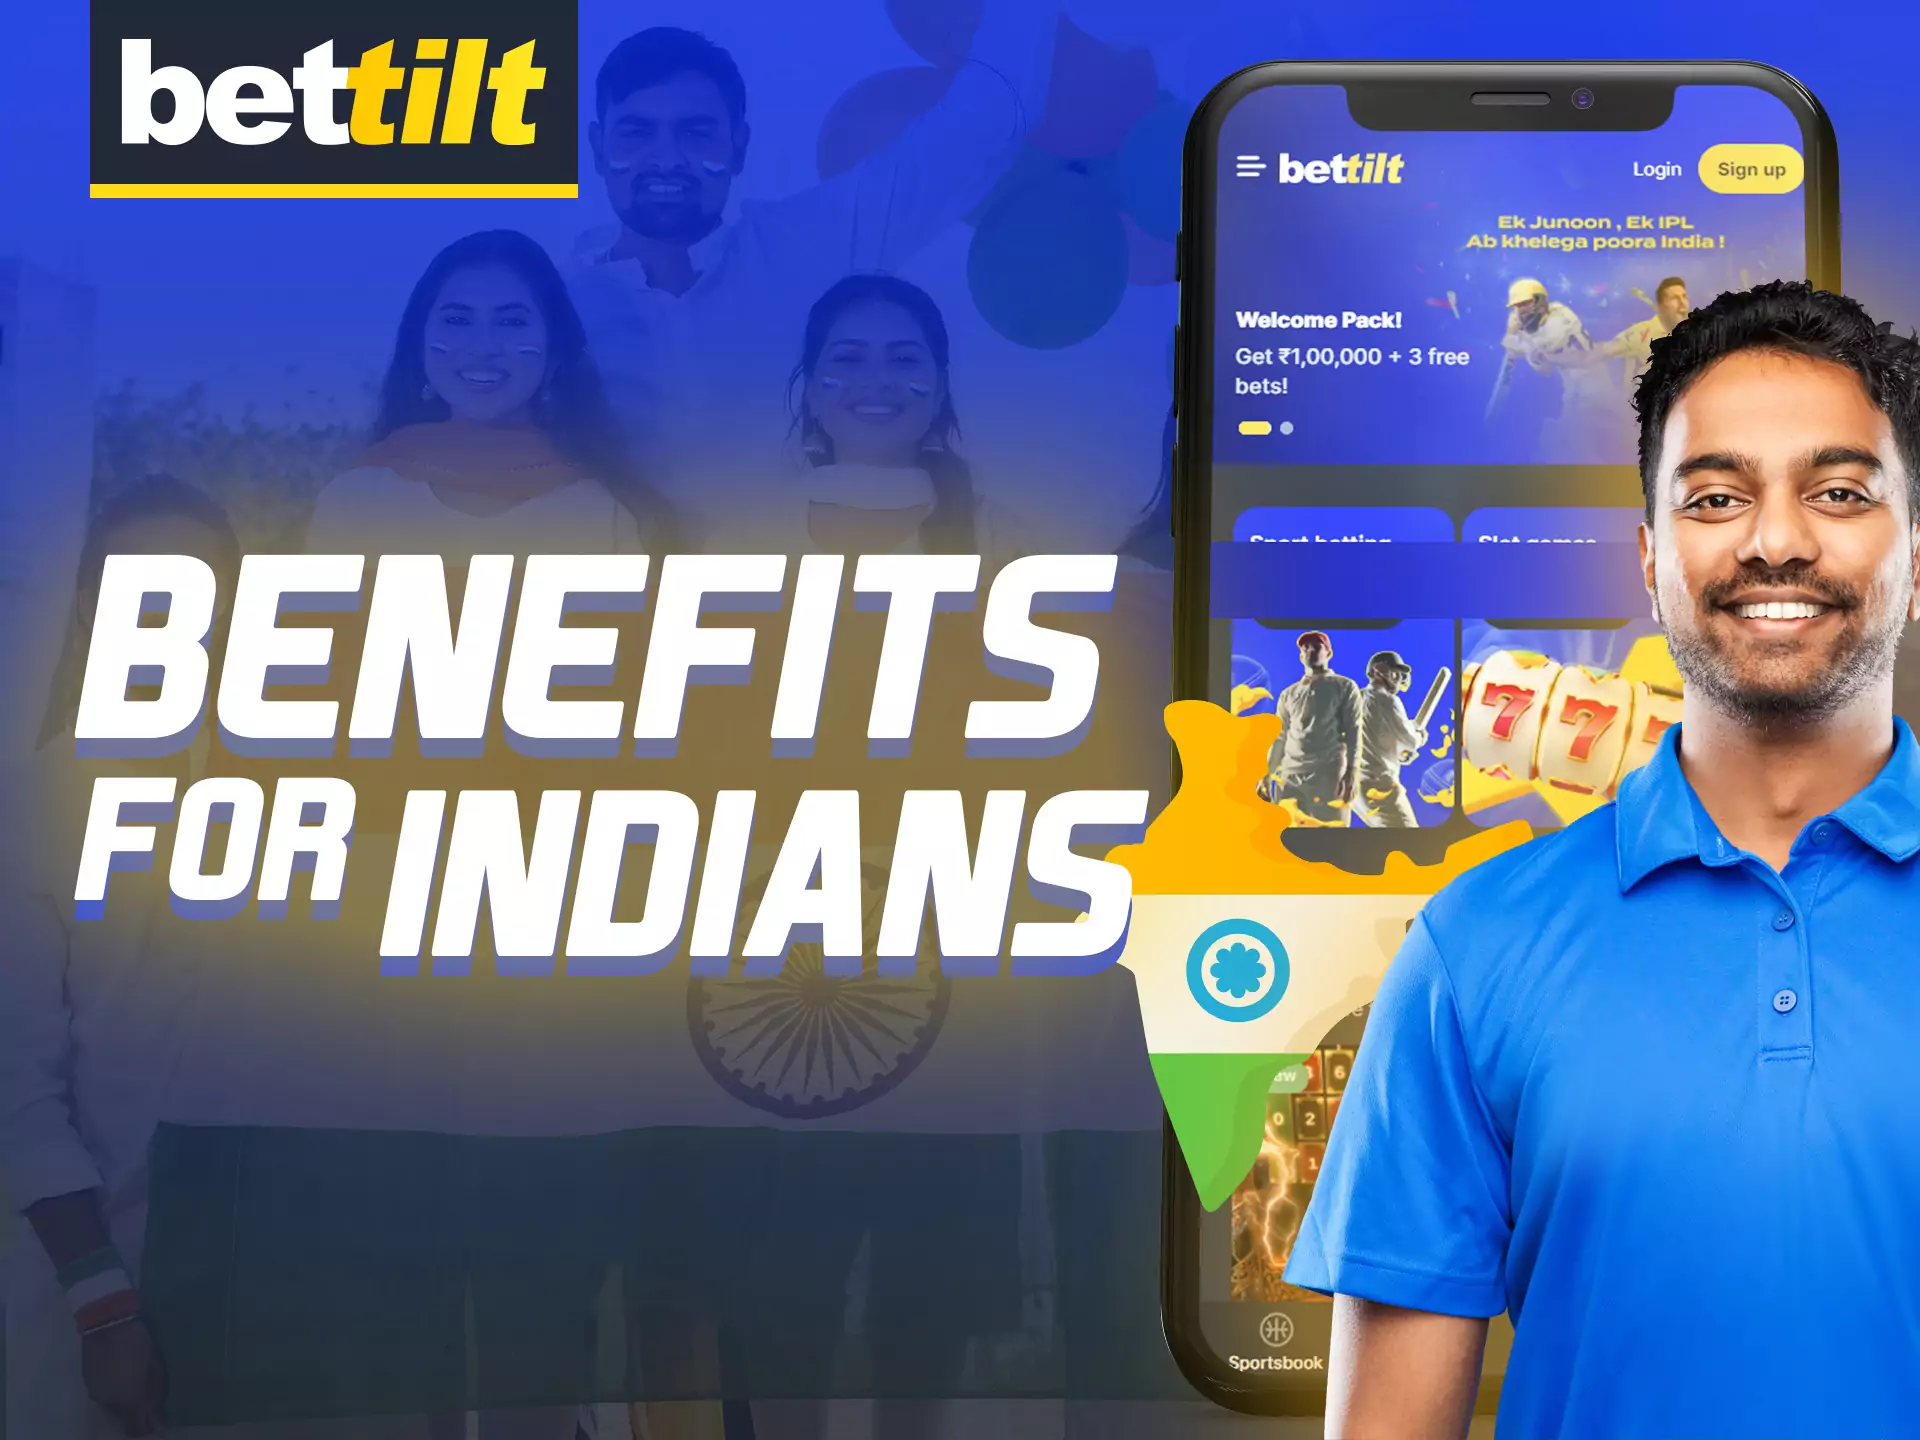 The Bettilt app offers its Indian players many benefits and bonuses.